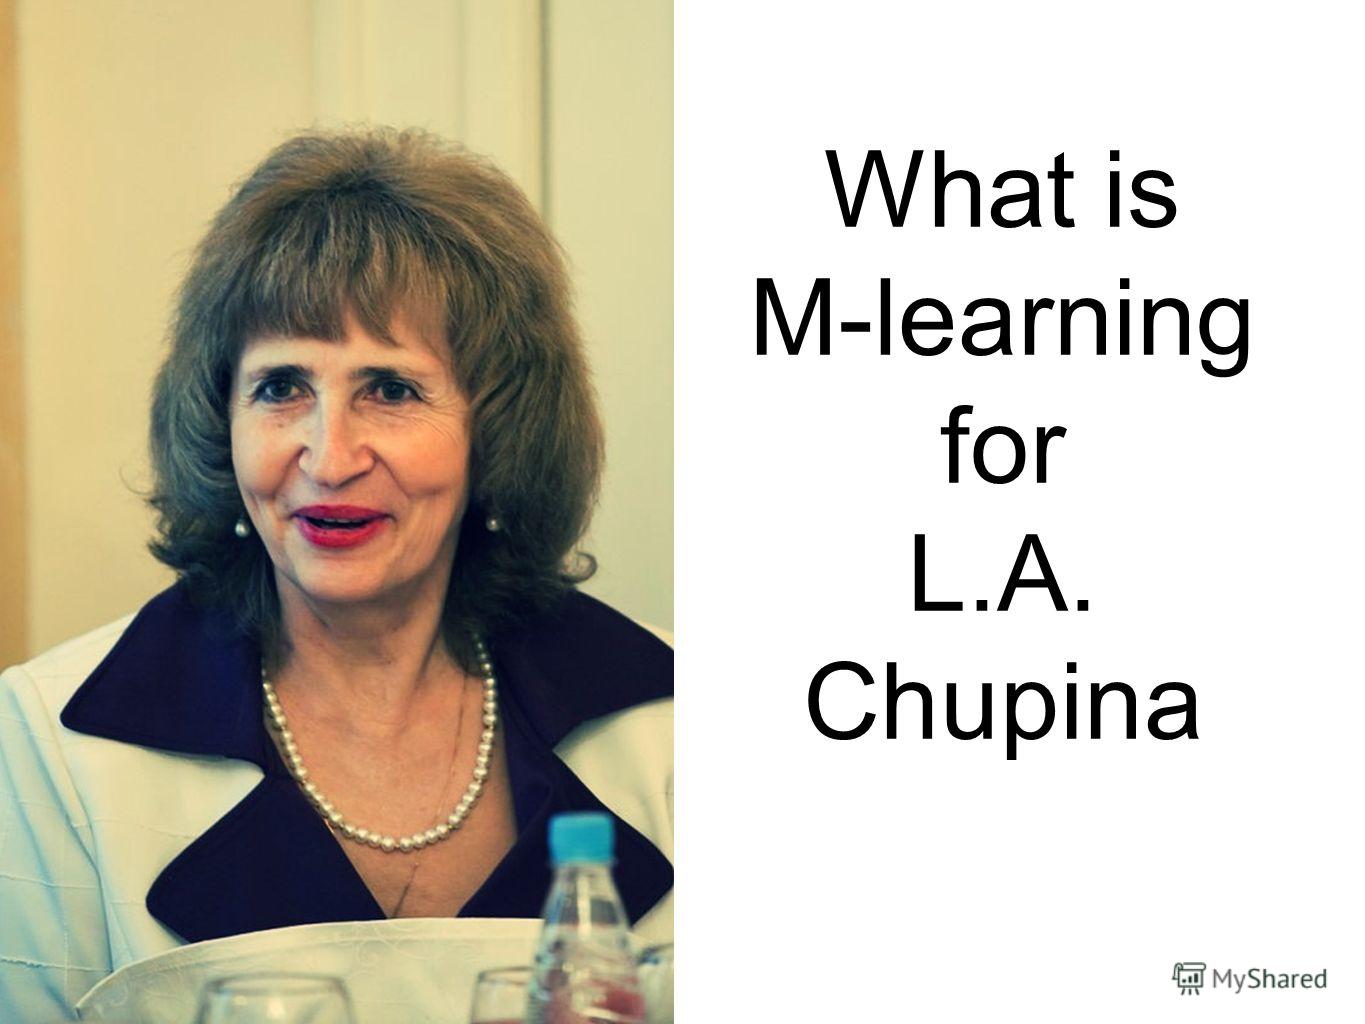 What is M-learning for L.A. Chupina